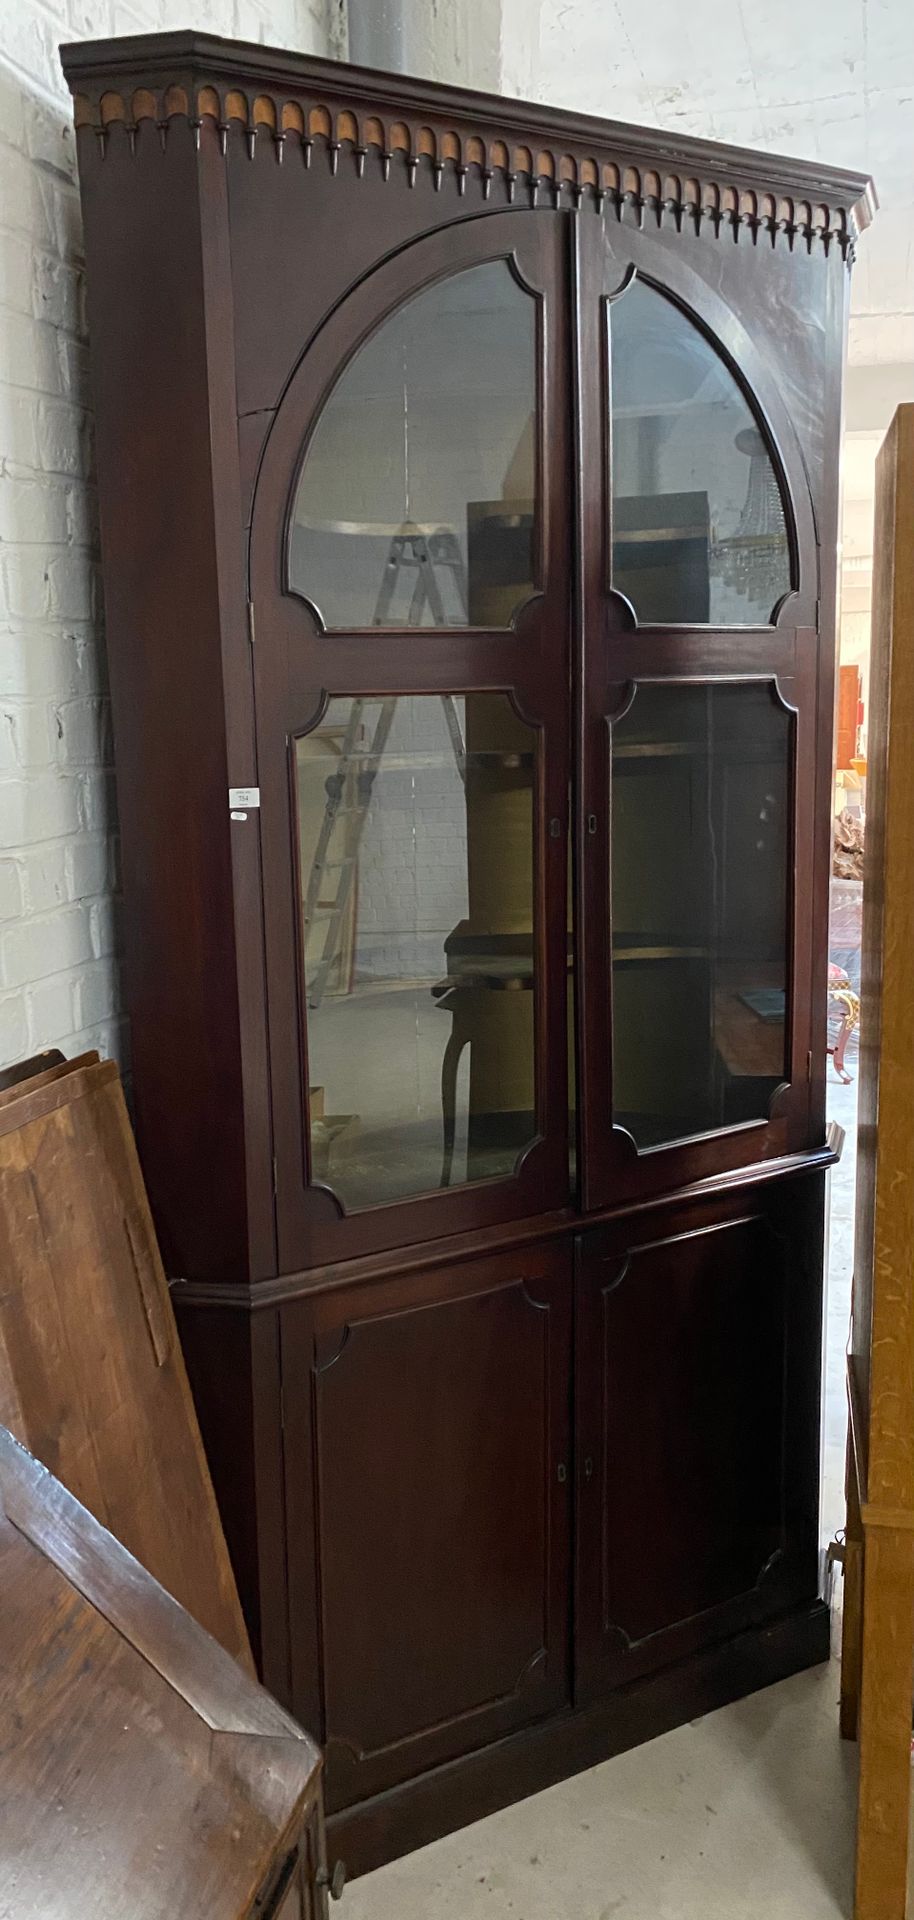 Encoignure Mahogany. Two glass doors on top. Two solid doors at the bottom. Engl&hellip;